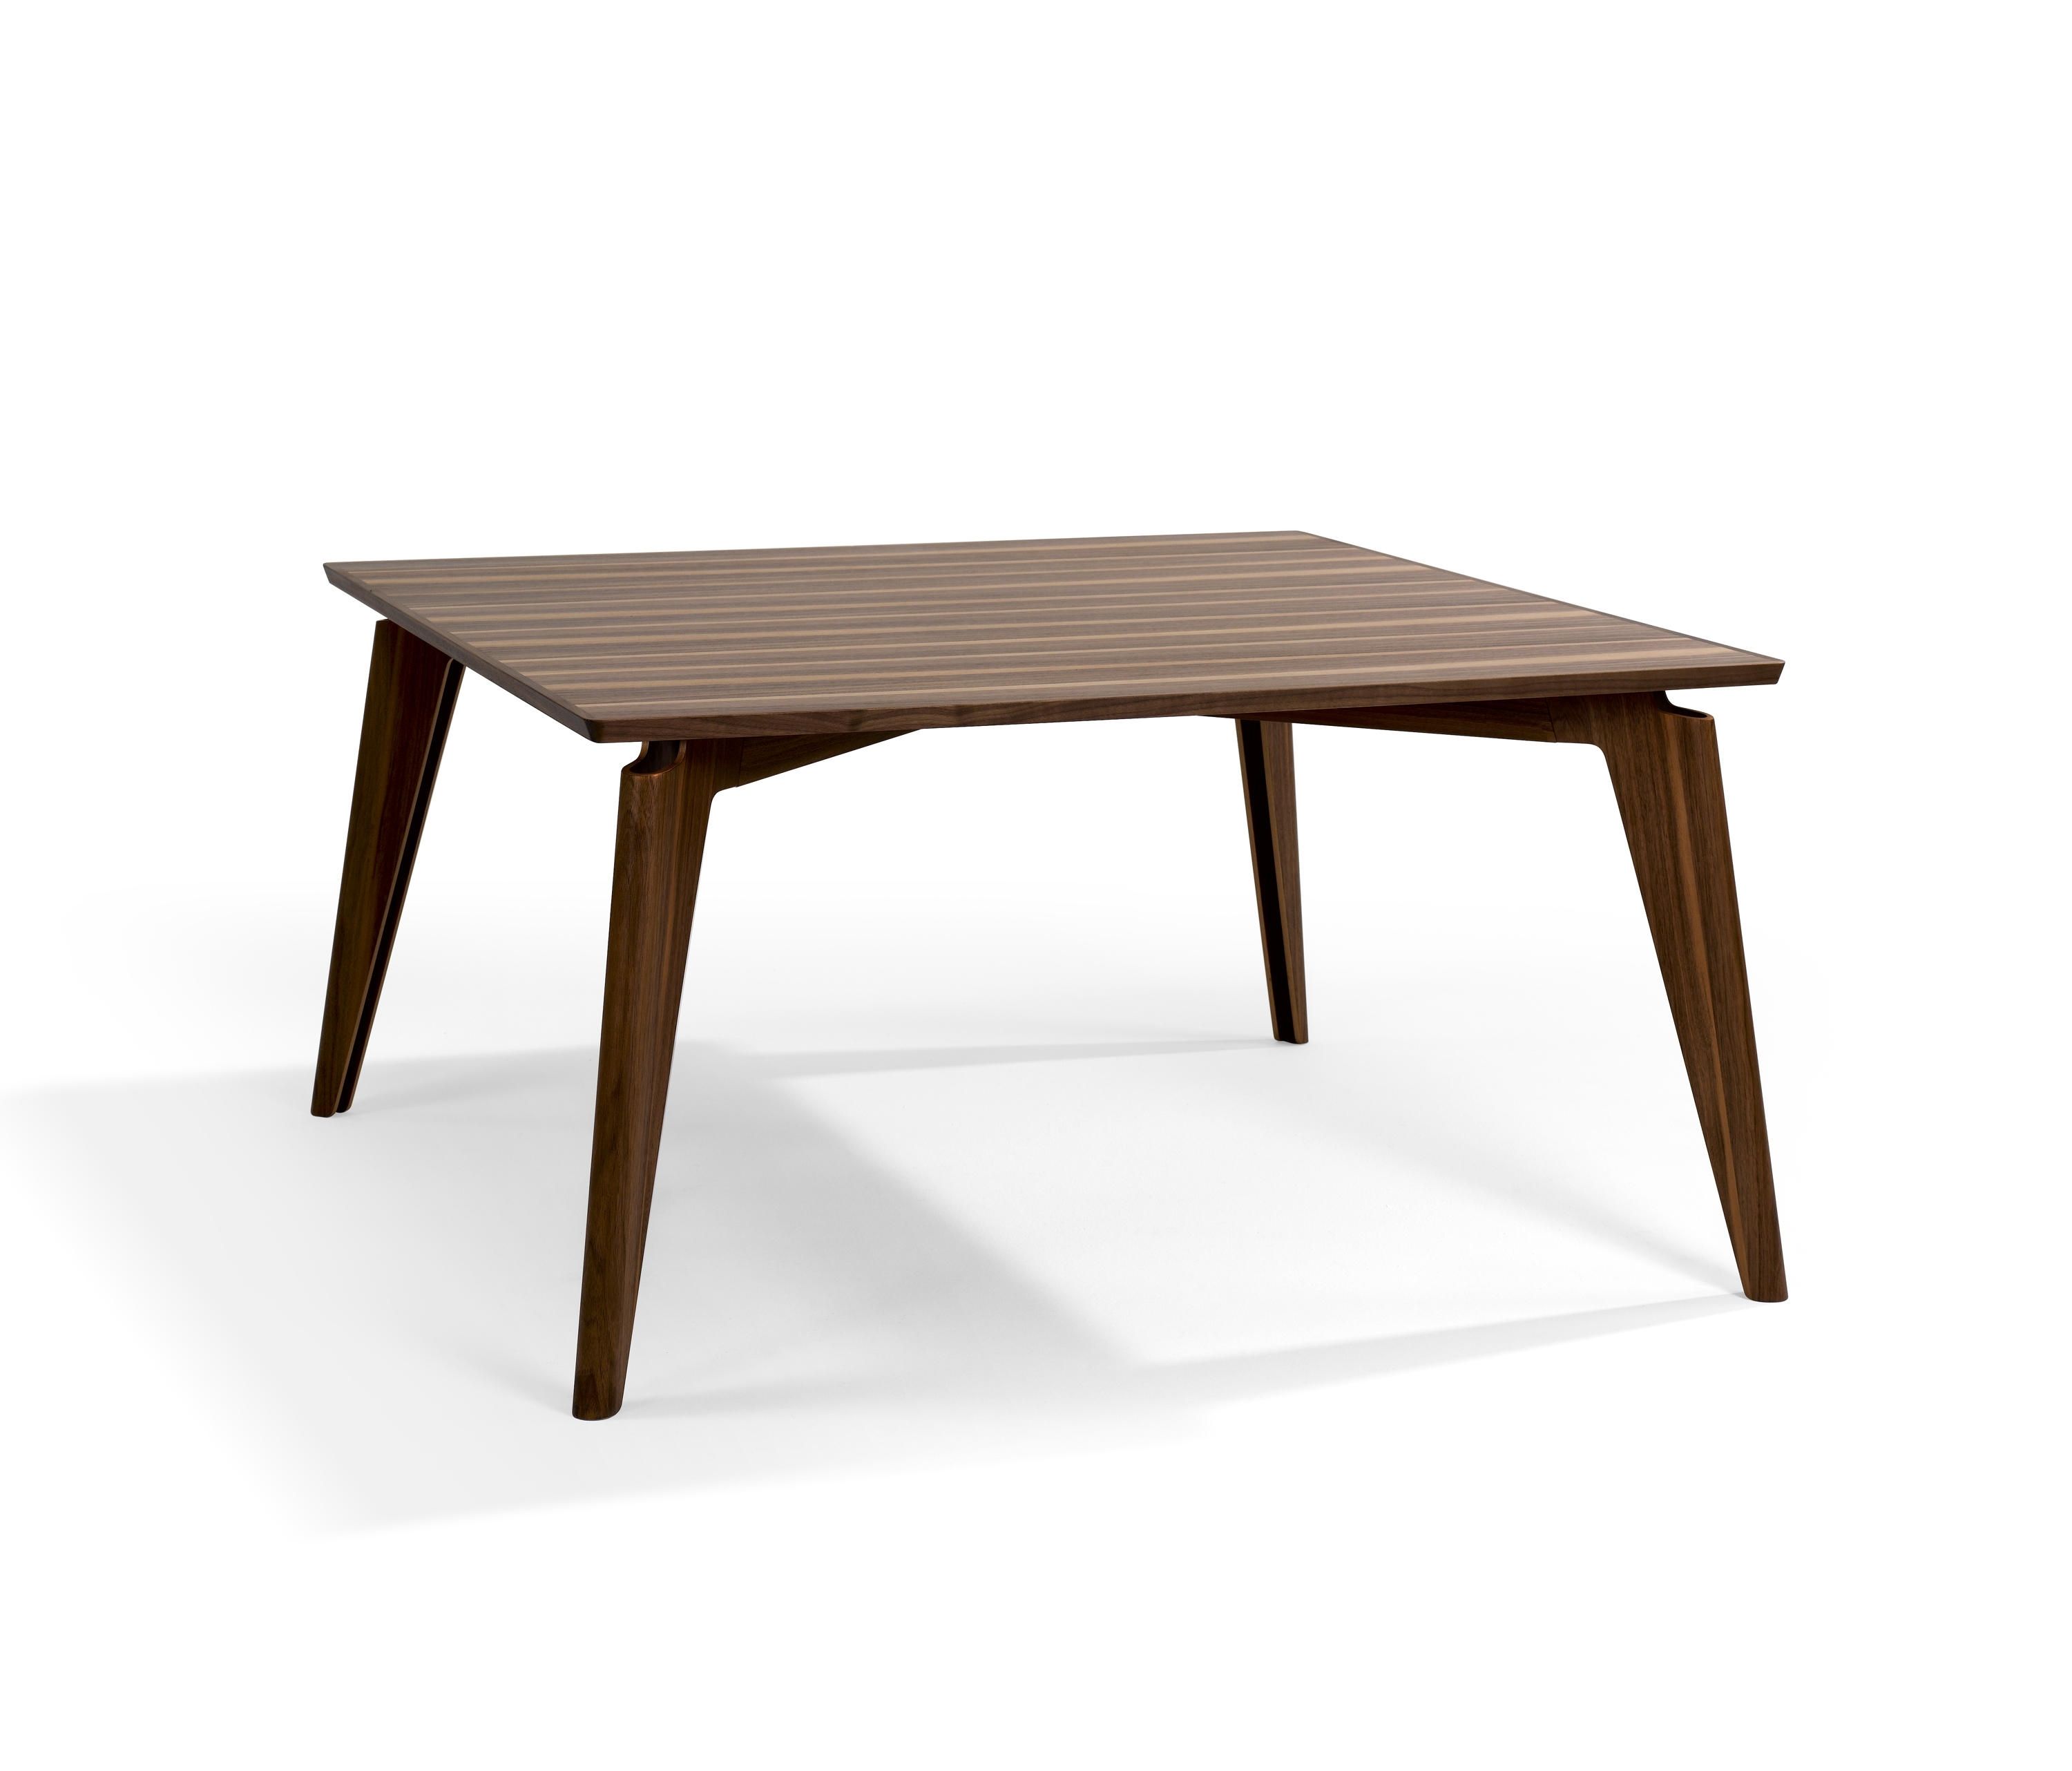 Gavin Dining Tables Intended For Famous Takushi Table – Dining Tables From Röthlisberger Kollektion (View 21 of 25)